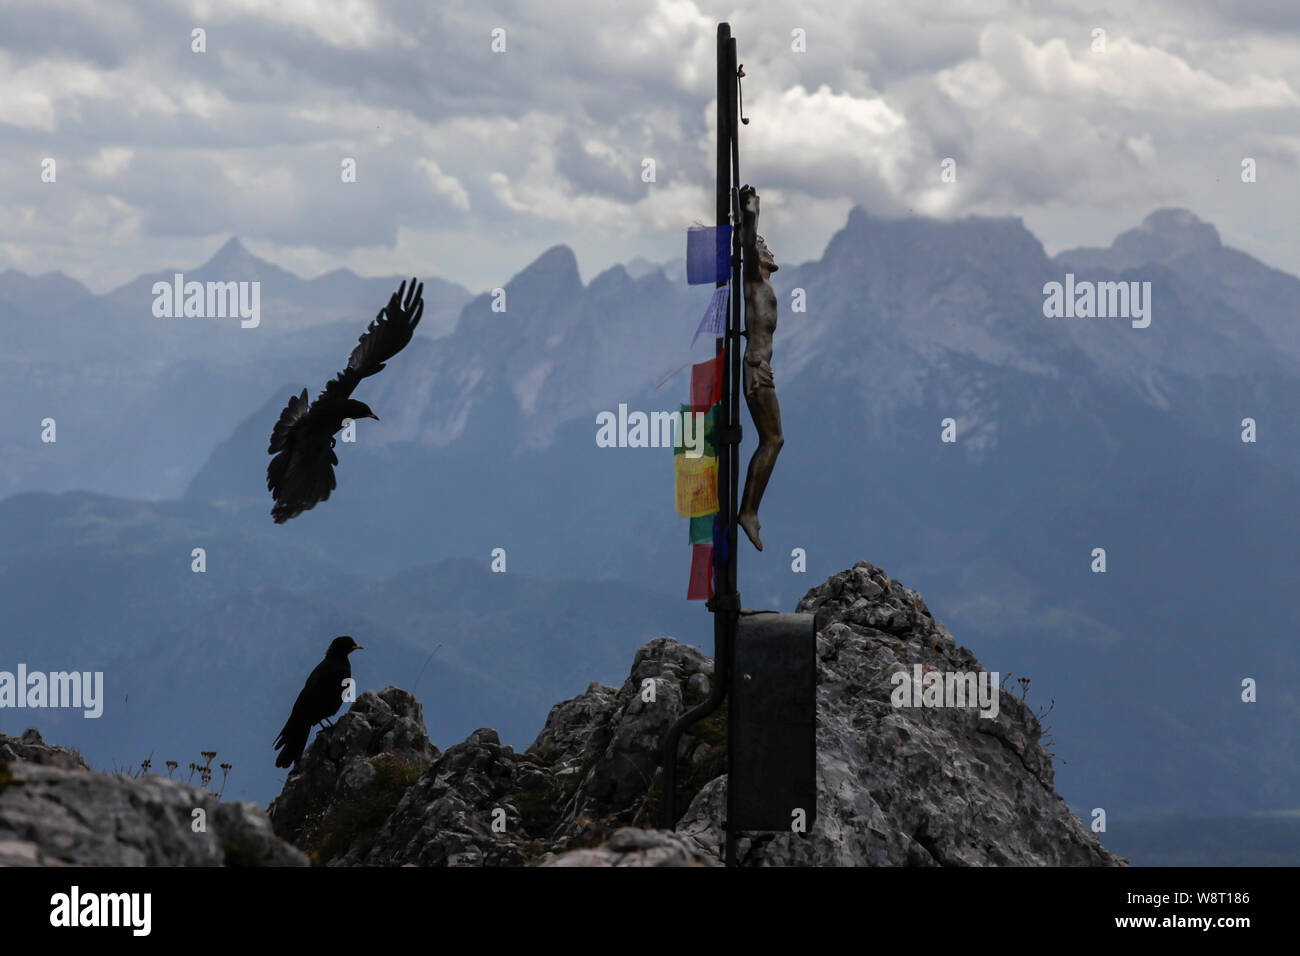 Two Yellow-billed Chough Pyrrhocorax graculus flying above a jesus cross on a mountain summit or ridge Stock Photo